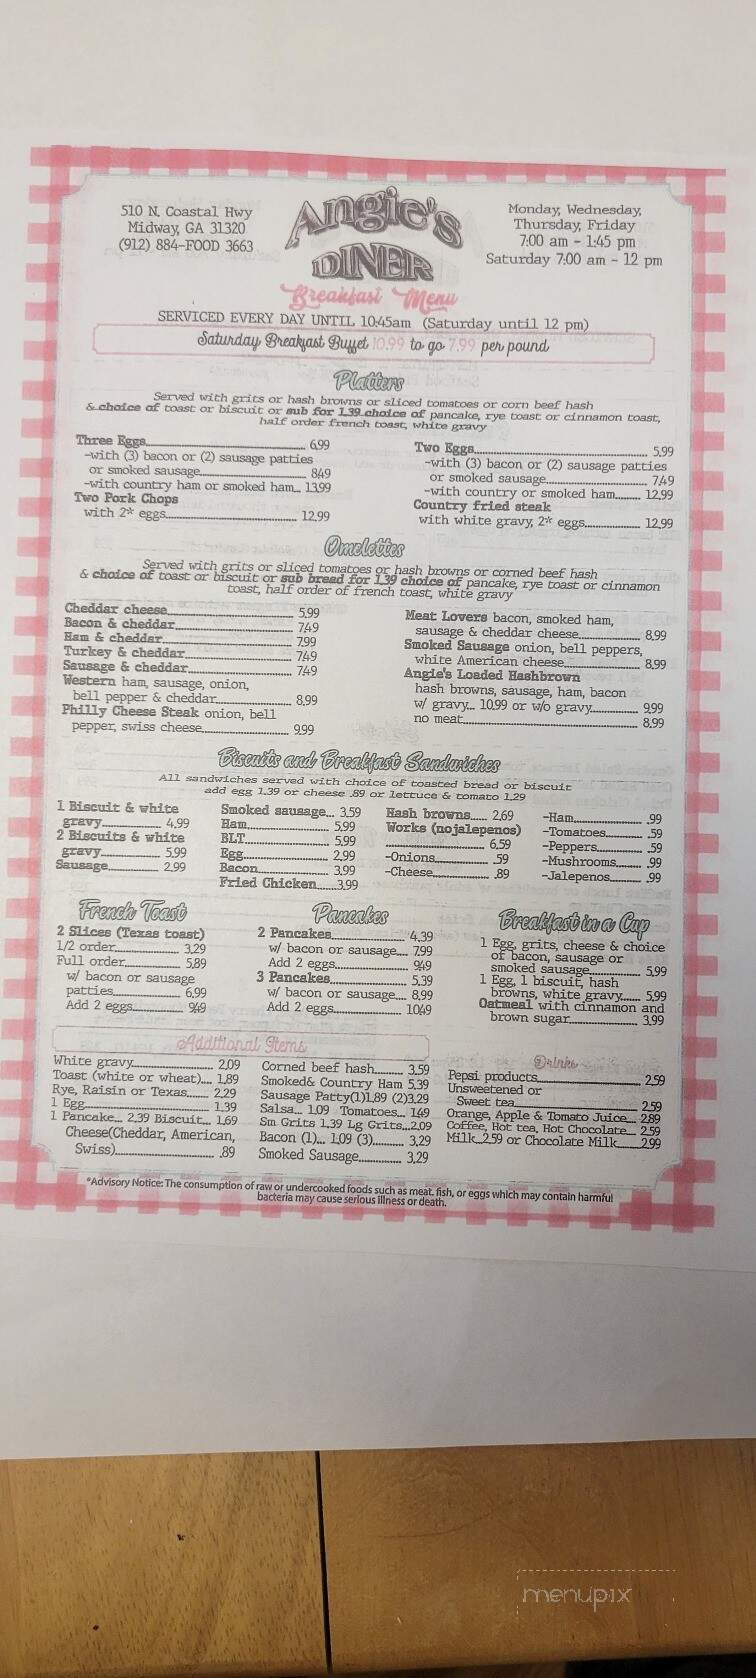 Angie's Diner - Midway, GA